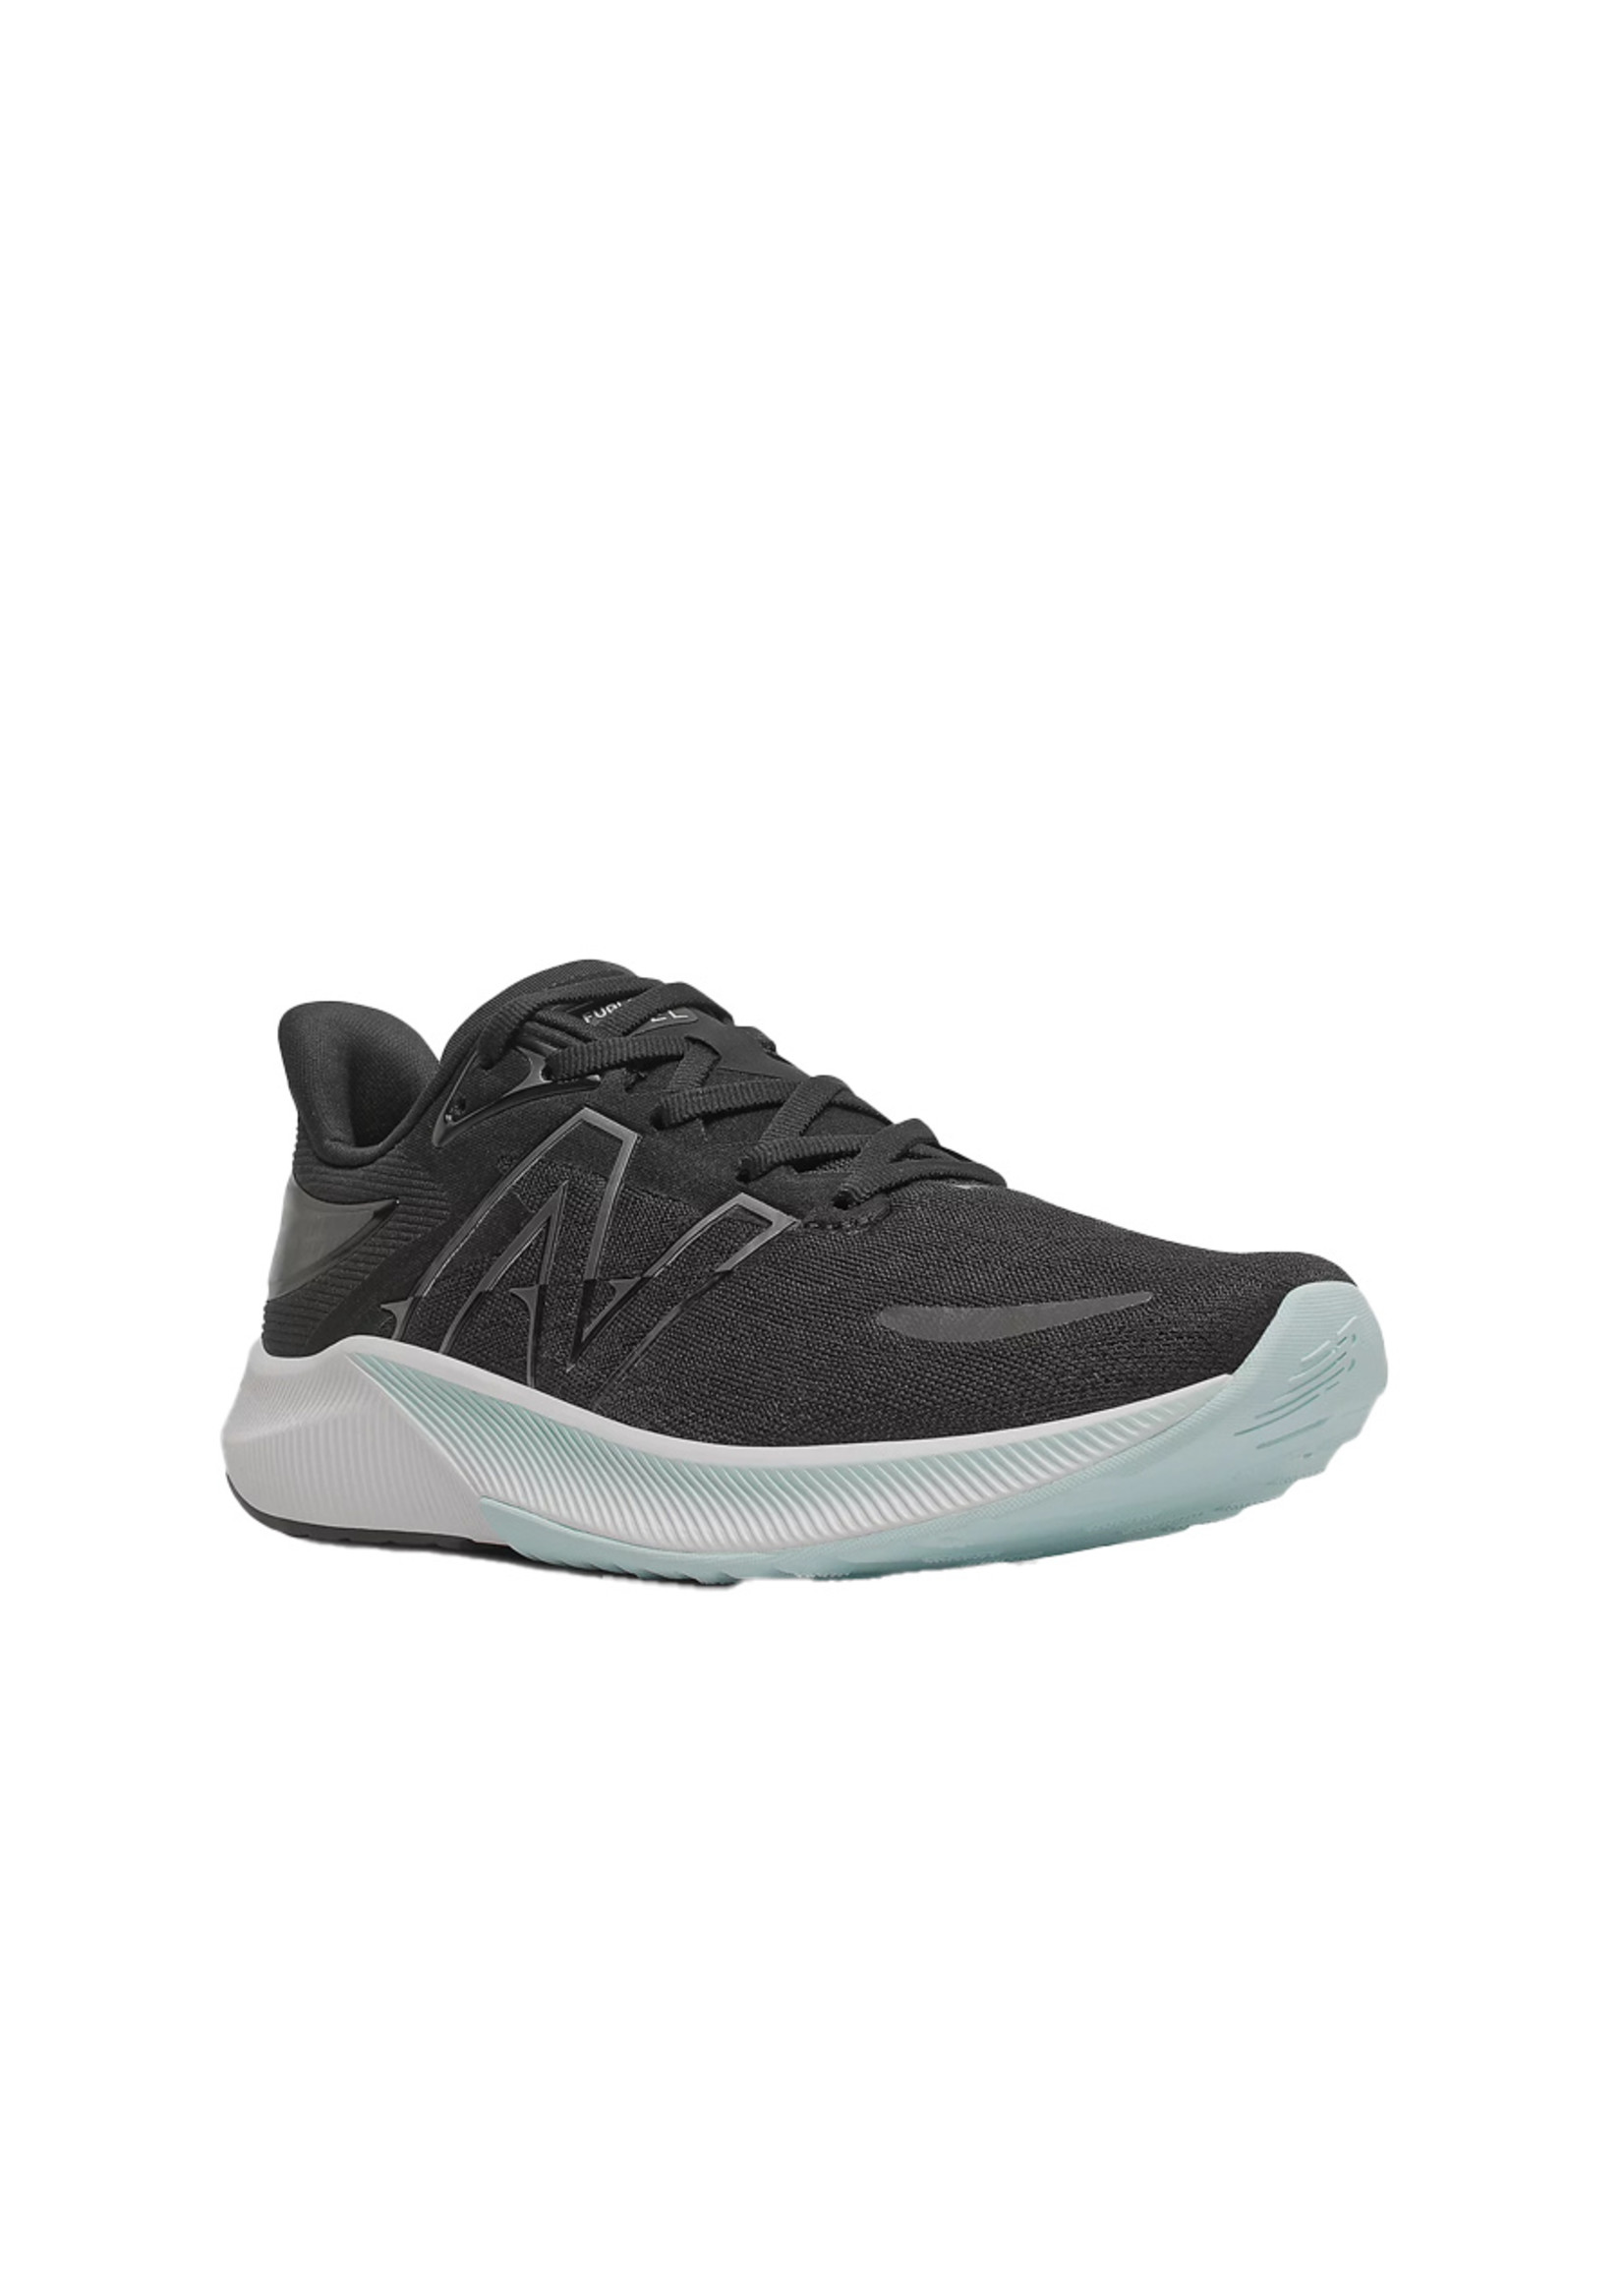 NEW BALANCE Souliers FUELCELL PROPEL v3 (Femme)